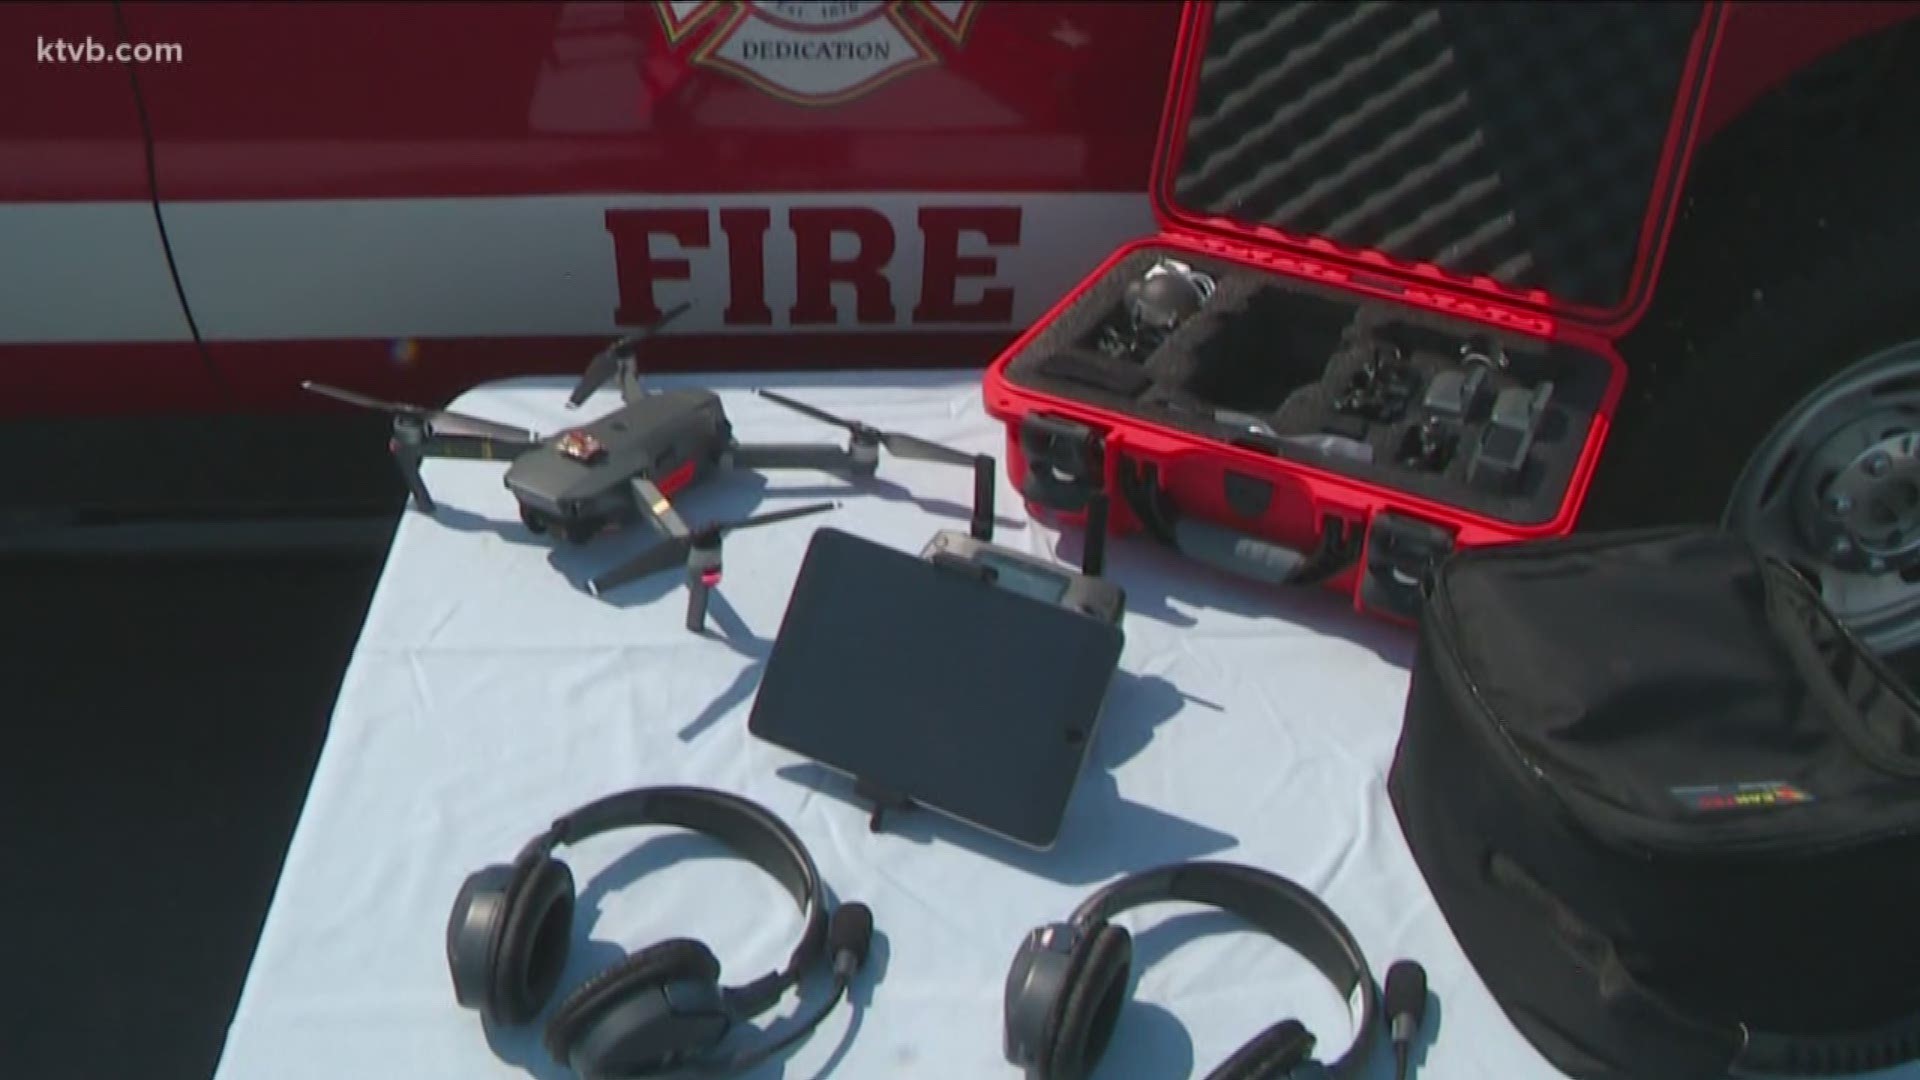 The drones will help fire commanders make important decisions.